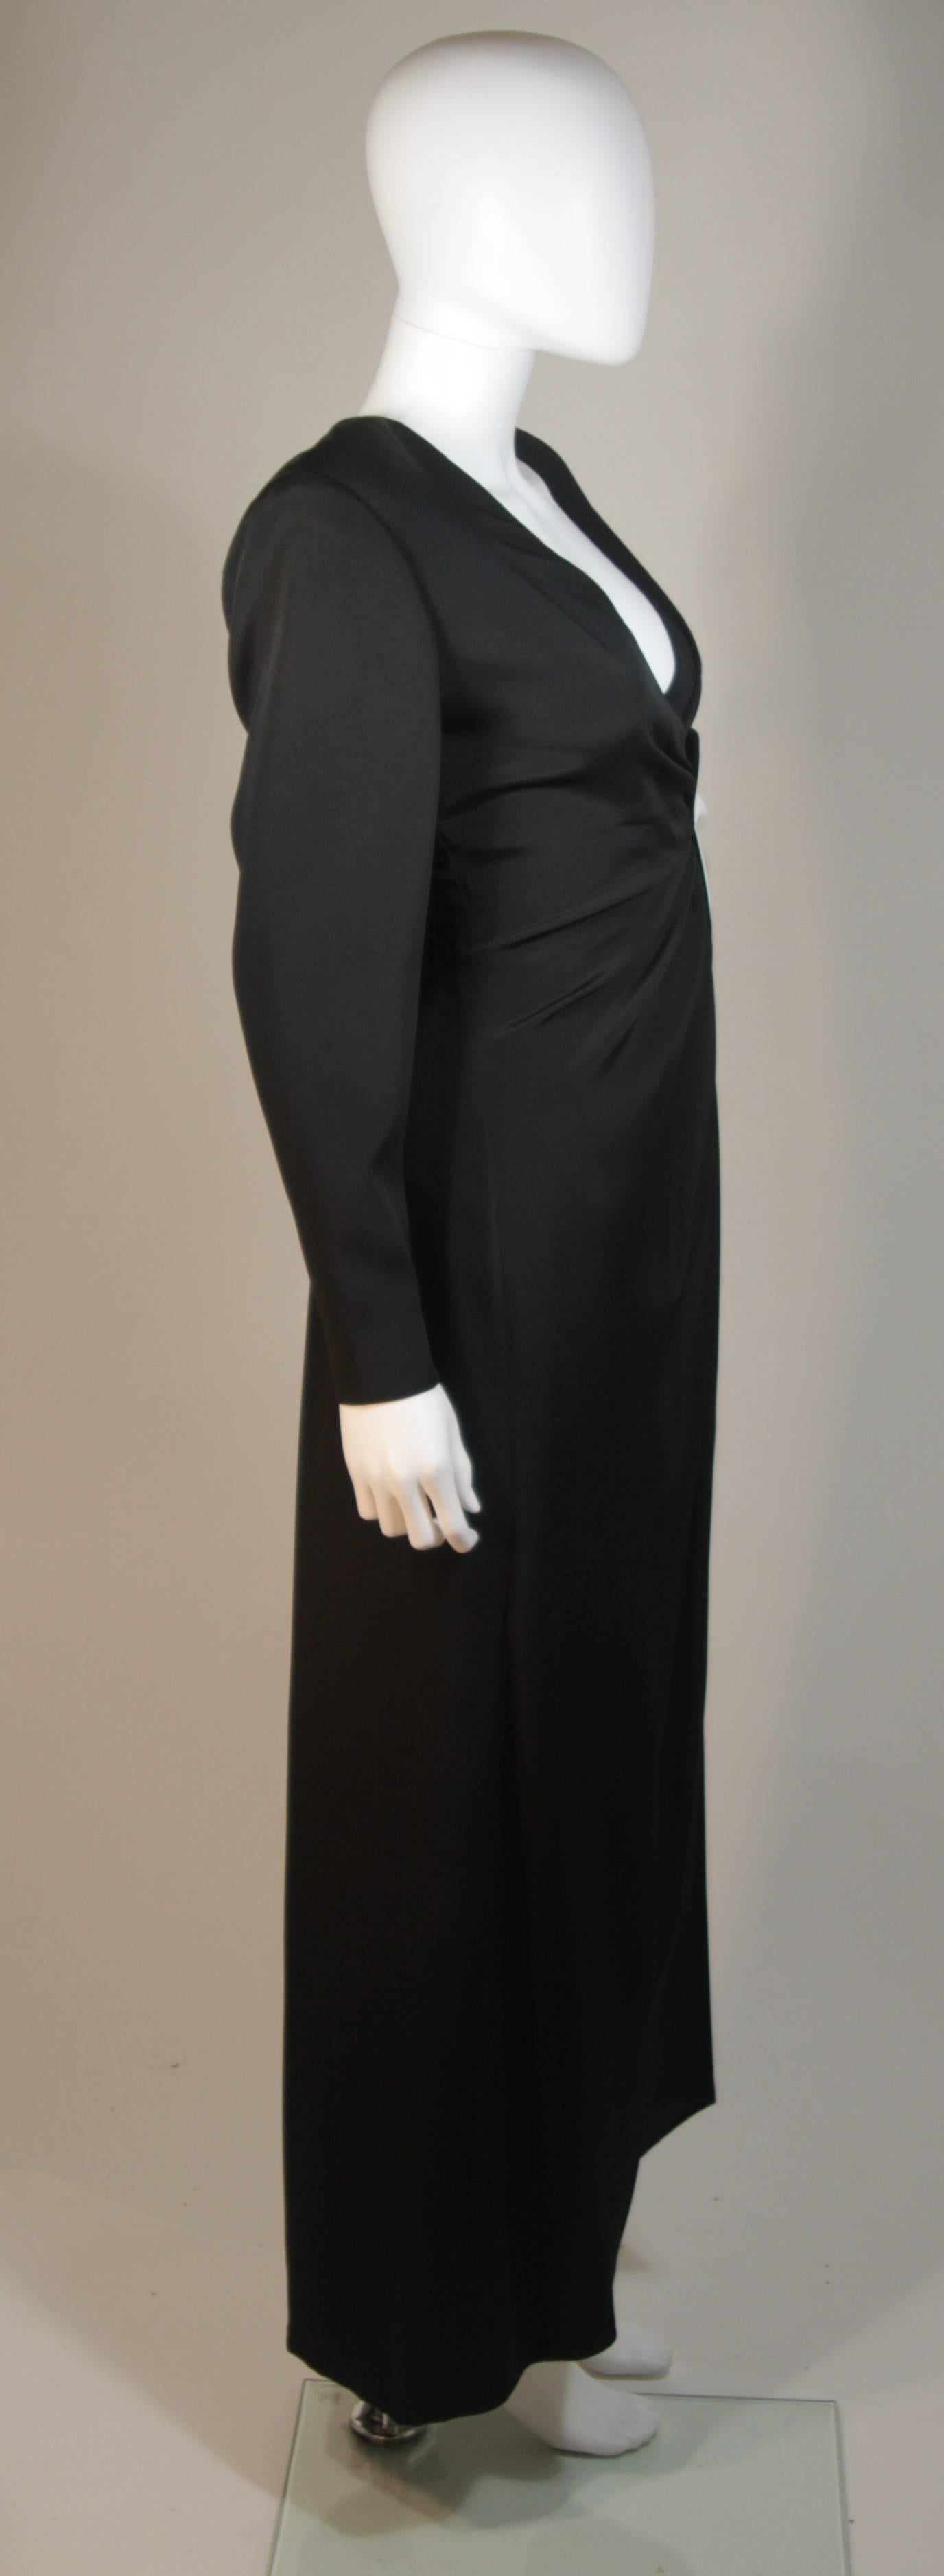 NOLAN MILLER Black and White Contrast Gown with Drape Detail Size 6 For Sale 1